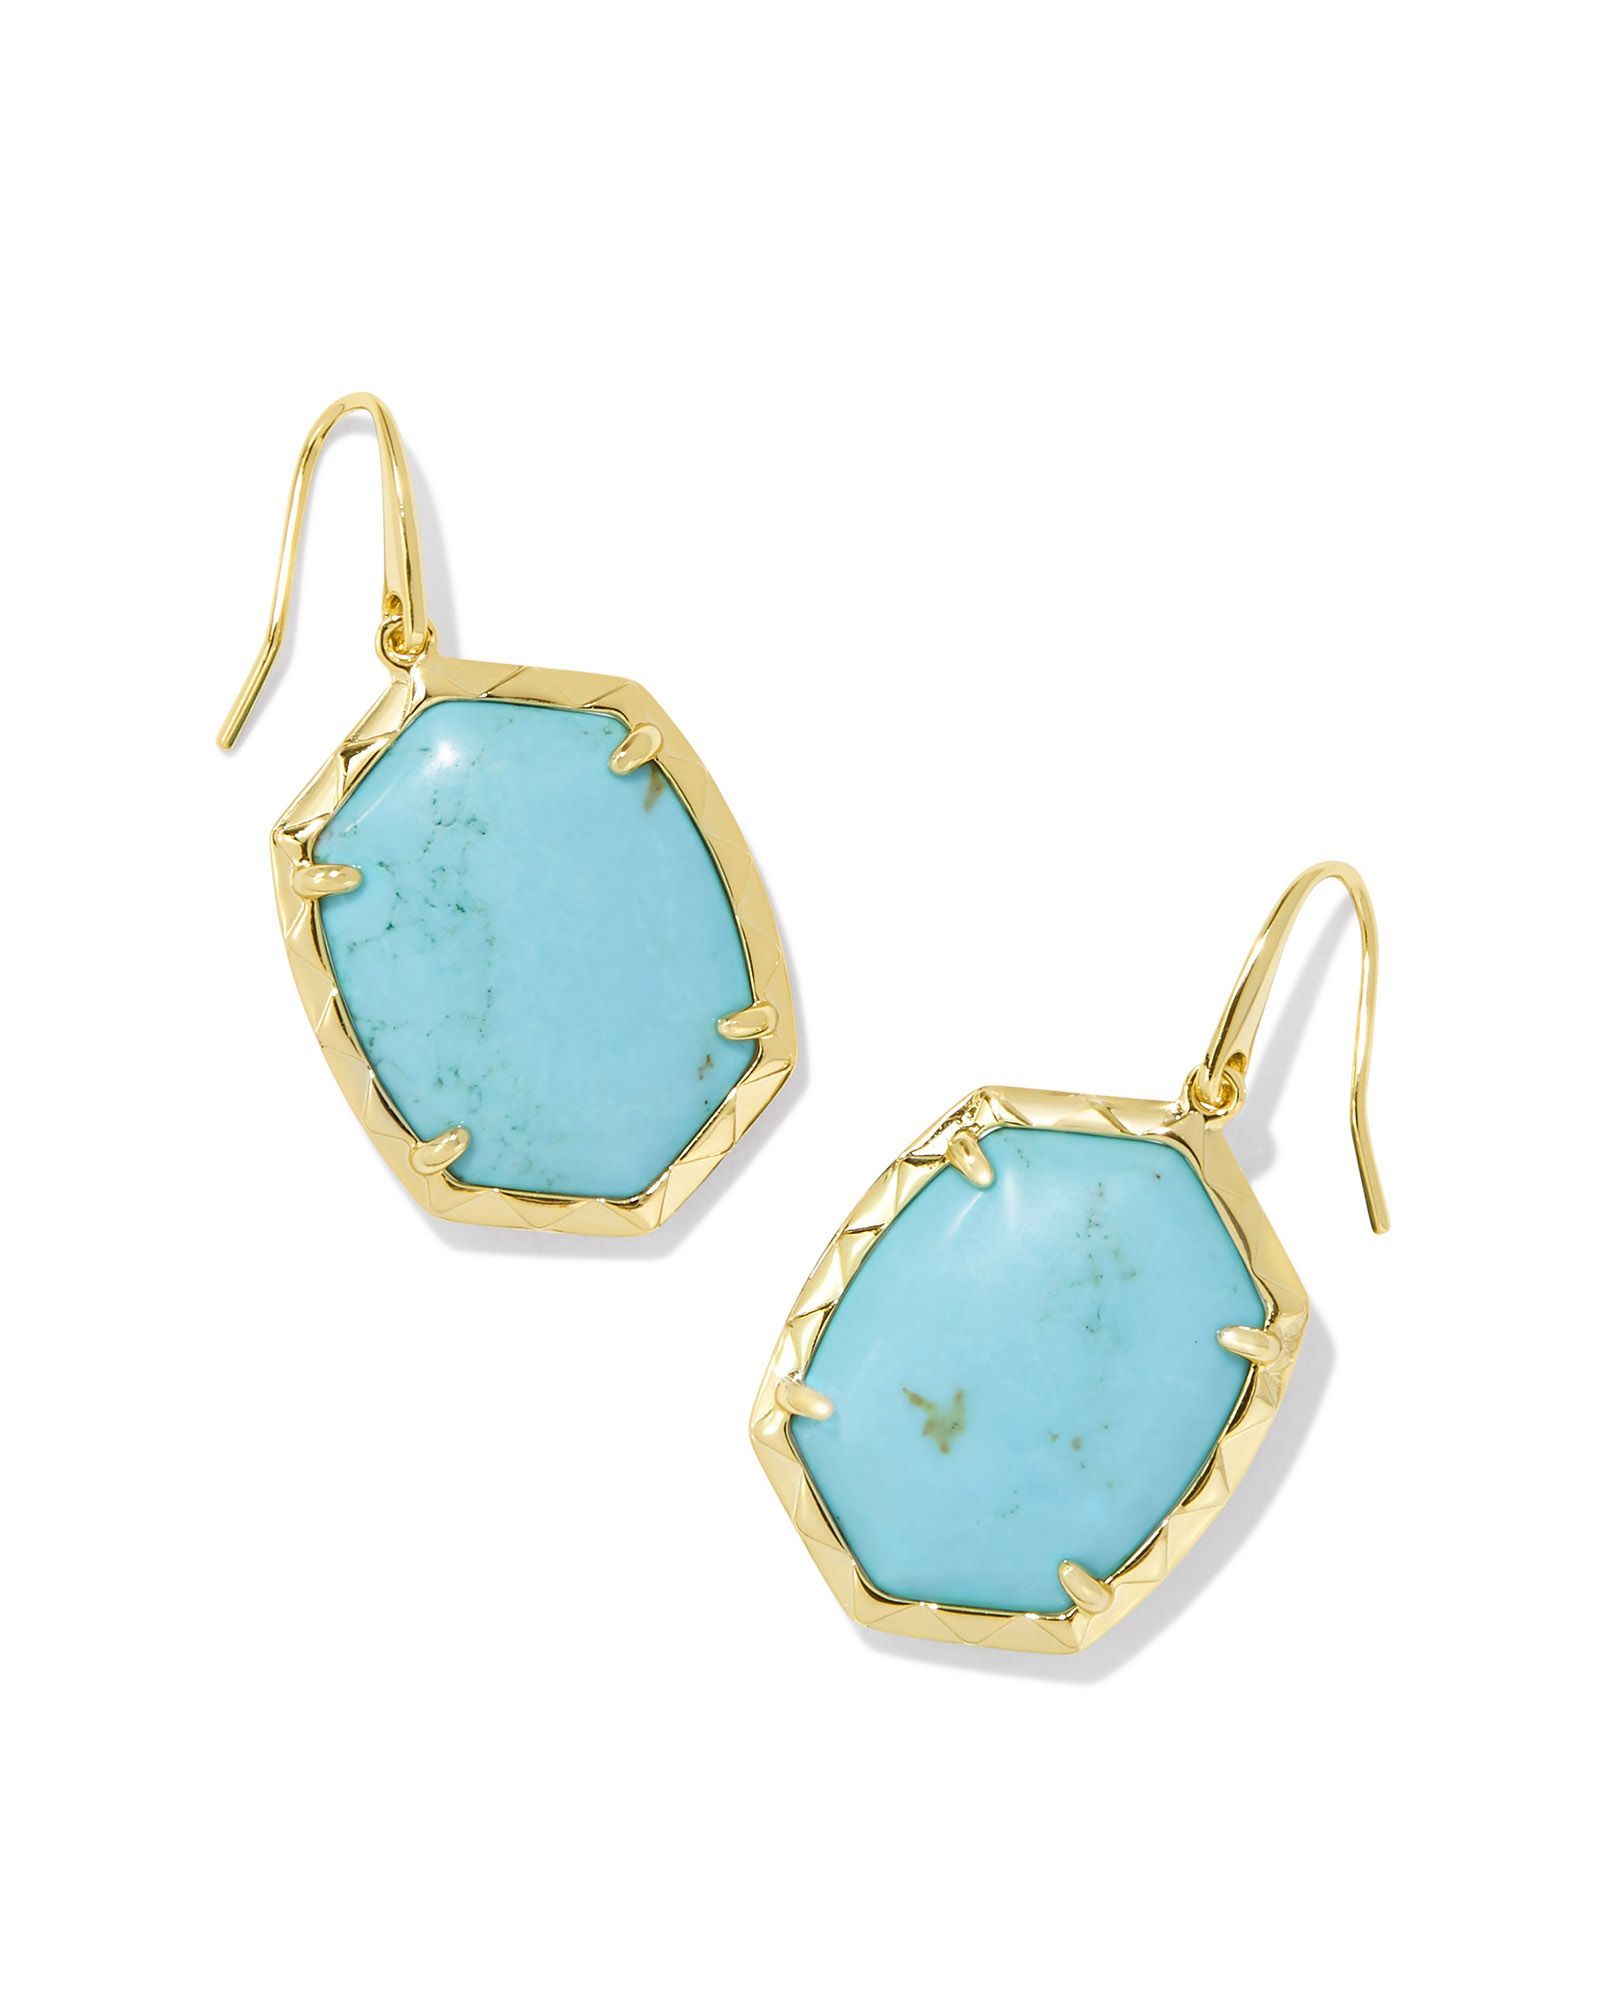 Daphne Gold Drop Earrings in Variegated Turquoise Magnesite | Kendra Scott